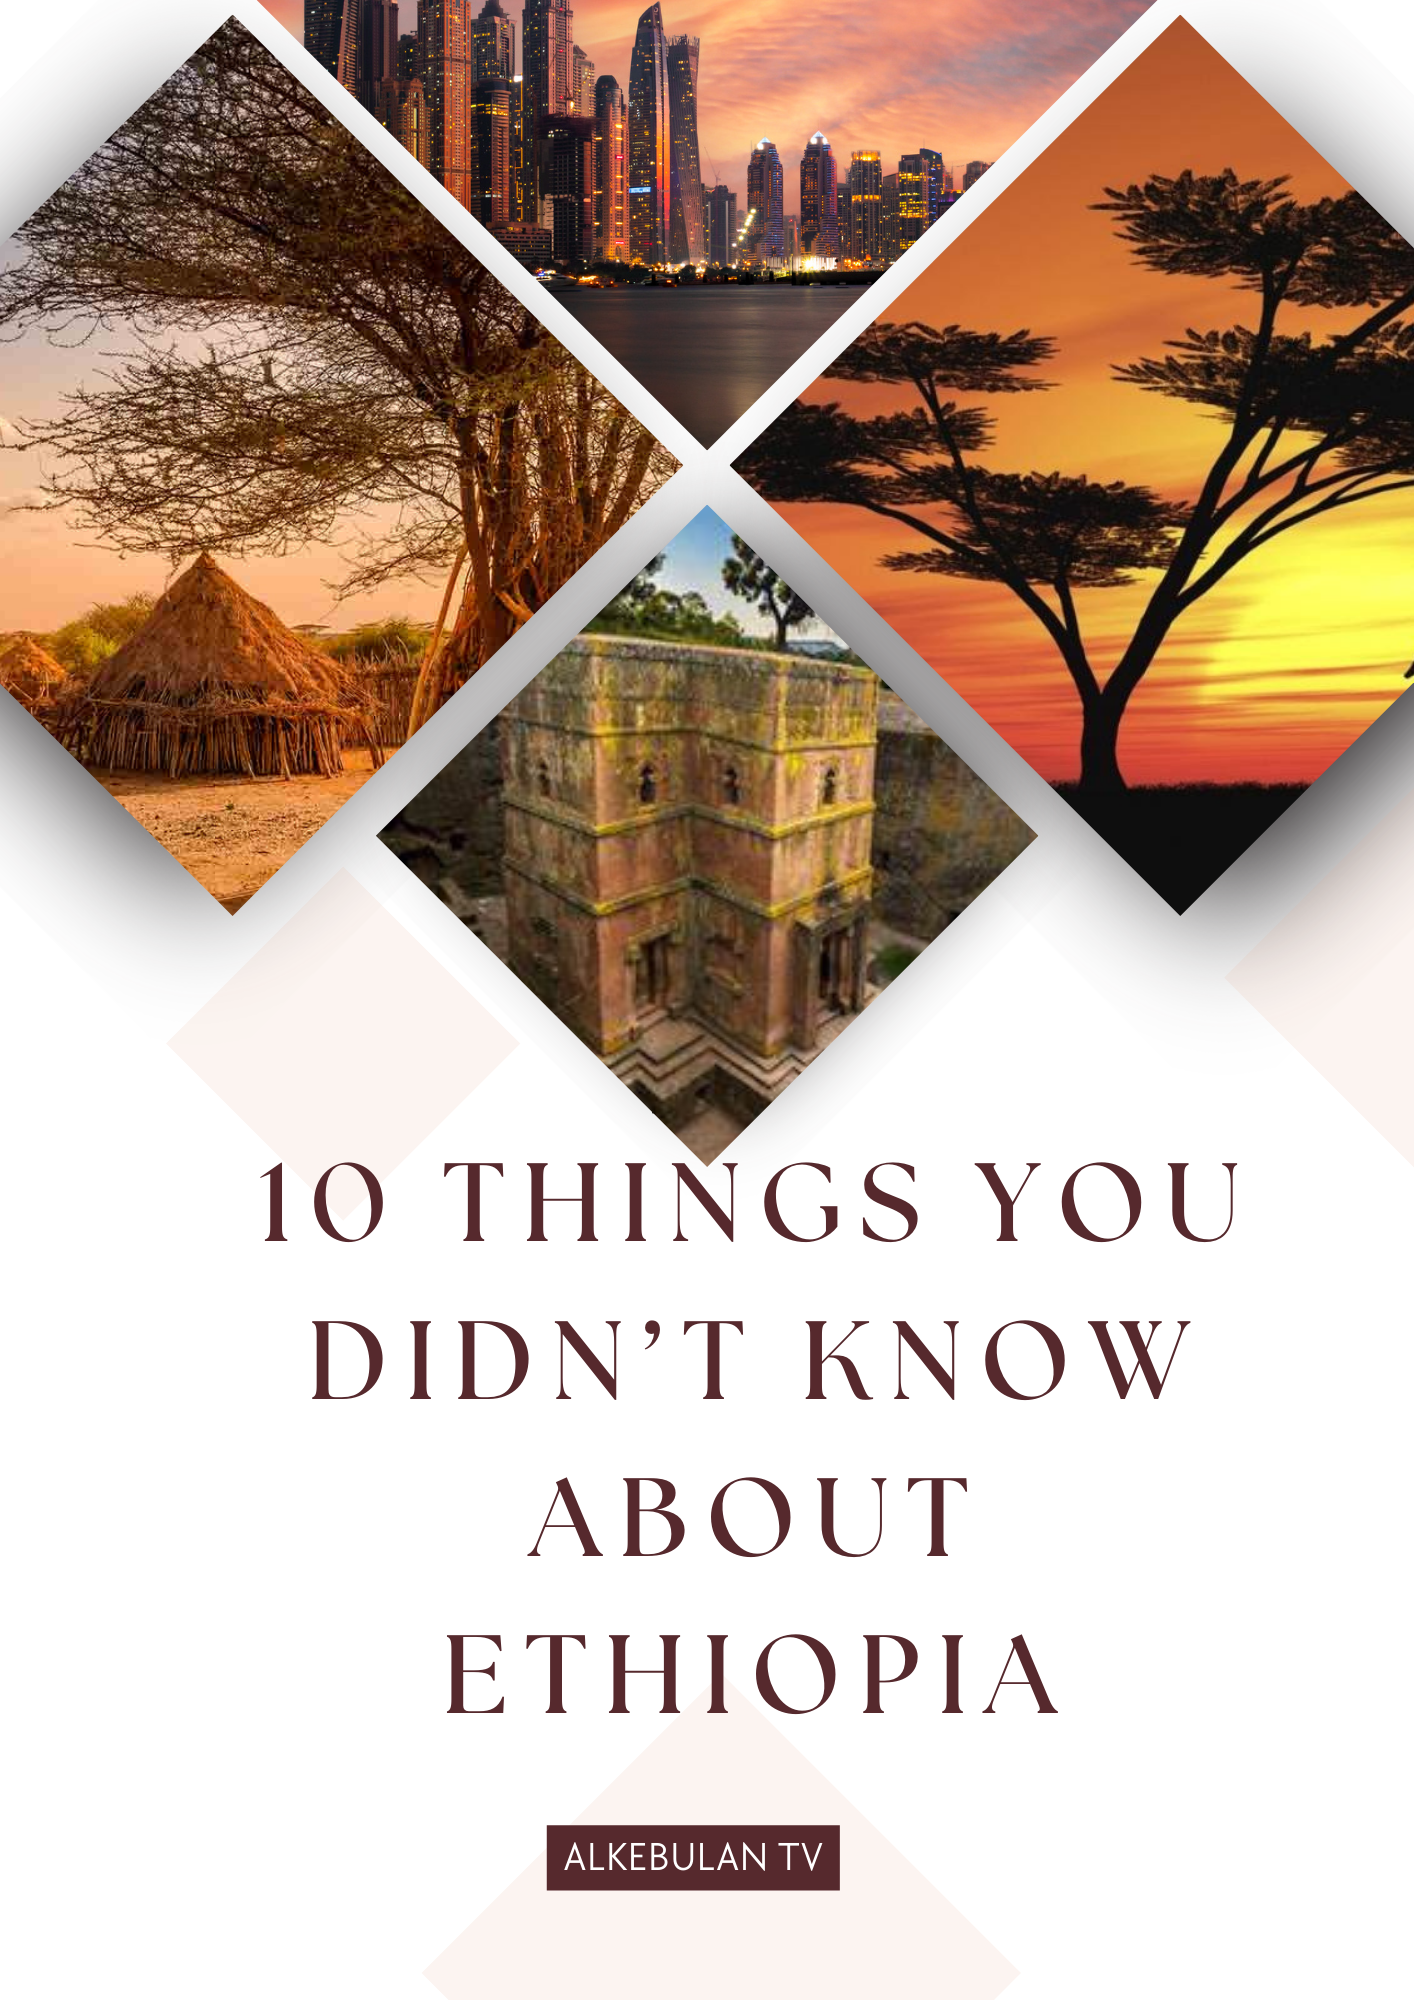 10 THINGS YOU DIDN'T KNOW ABOUT ETHIOPIA